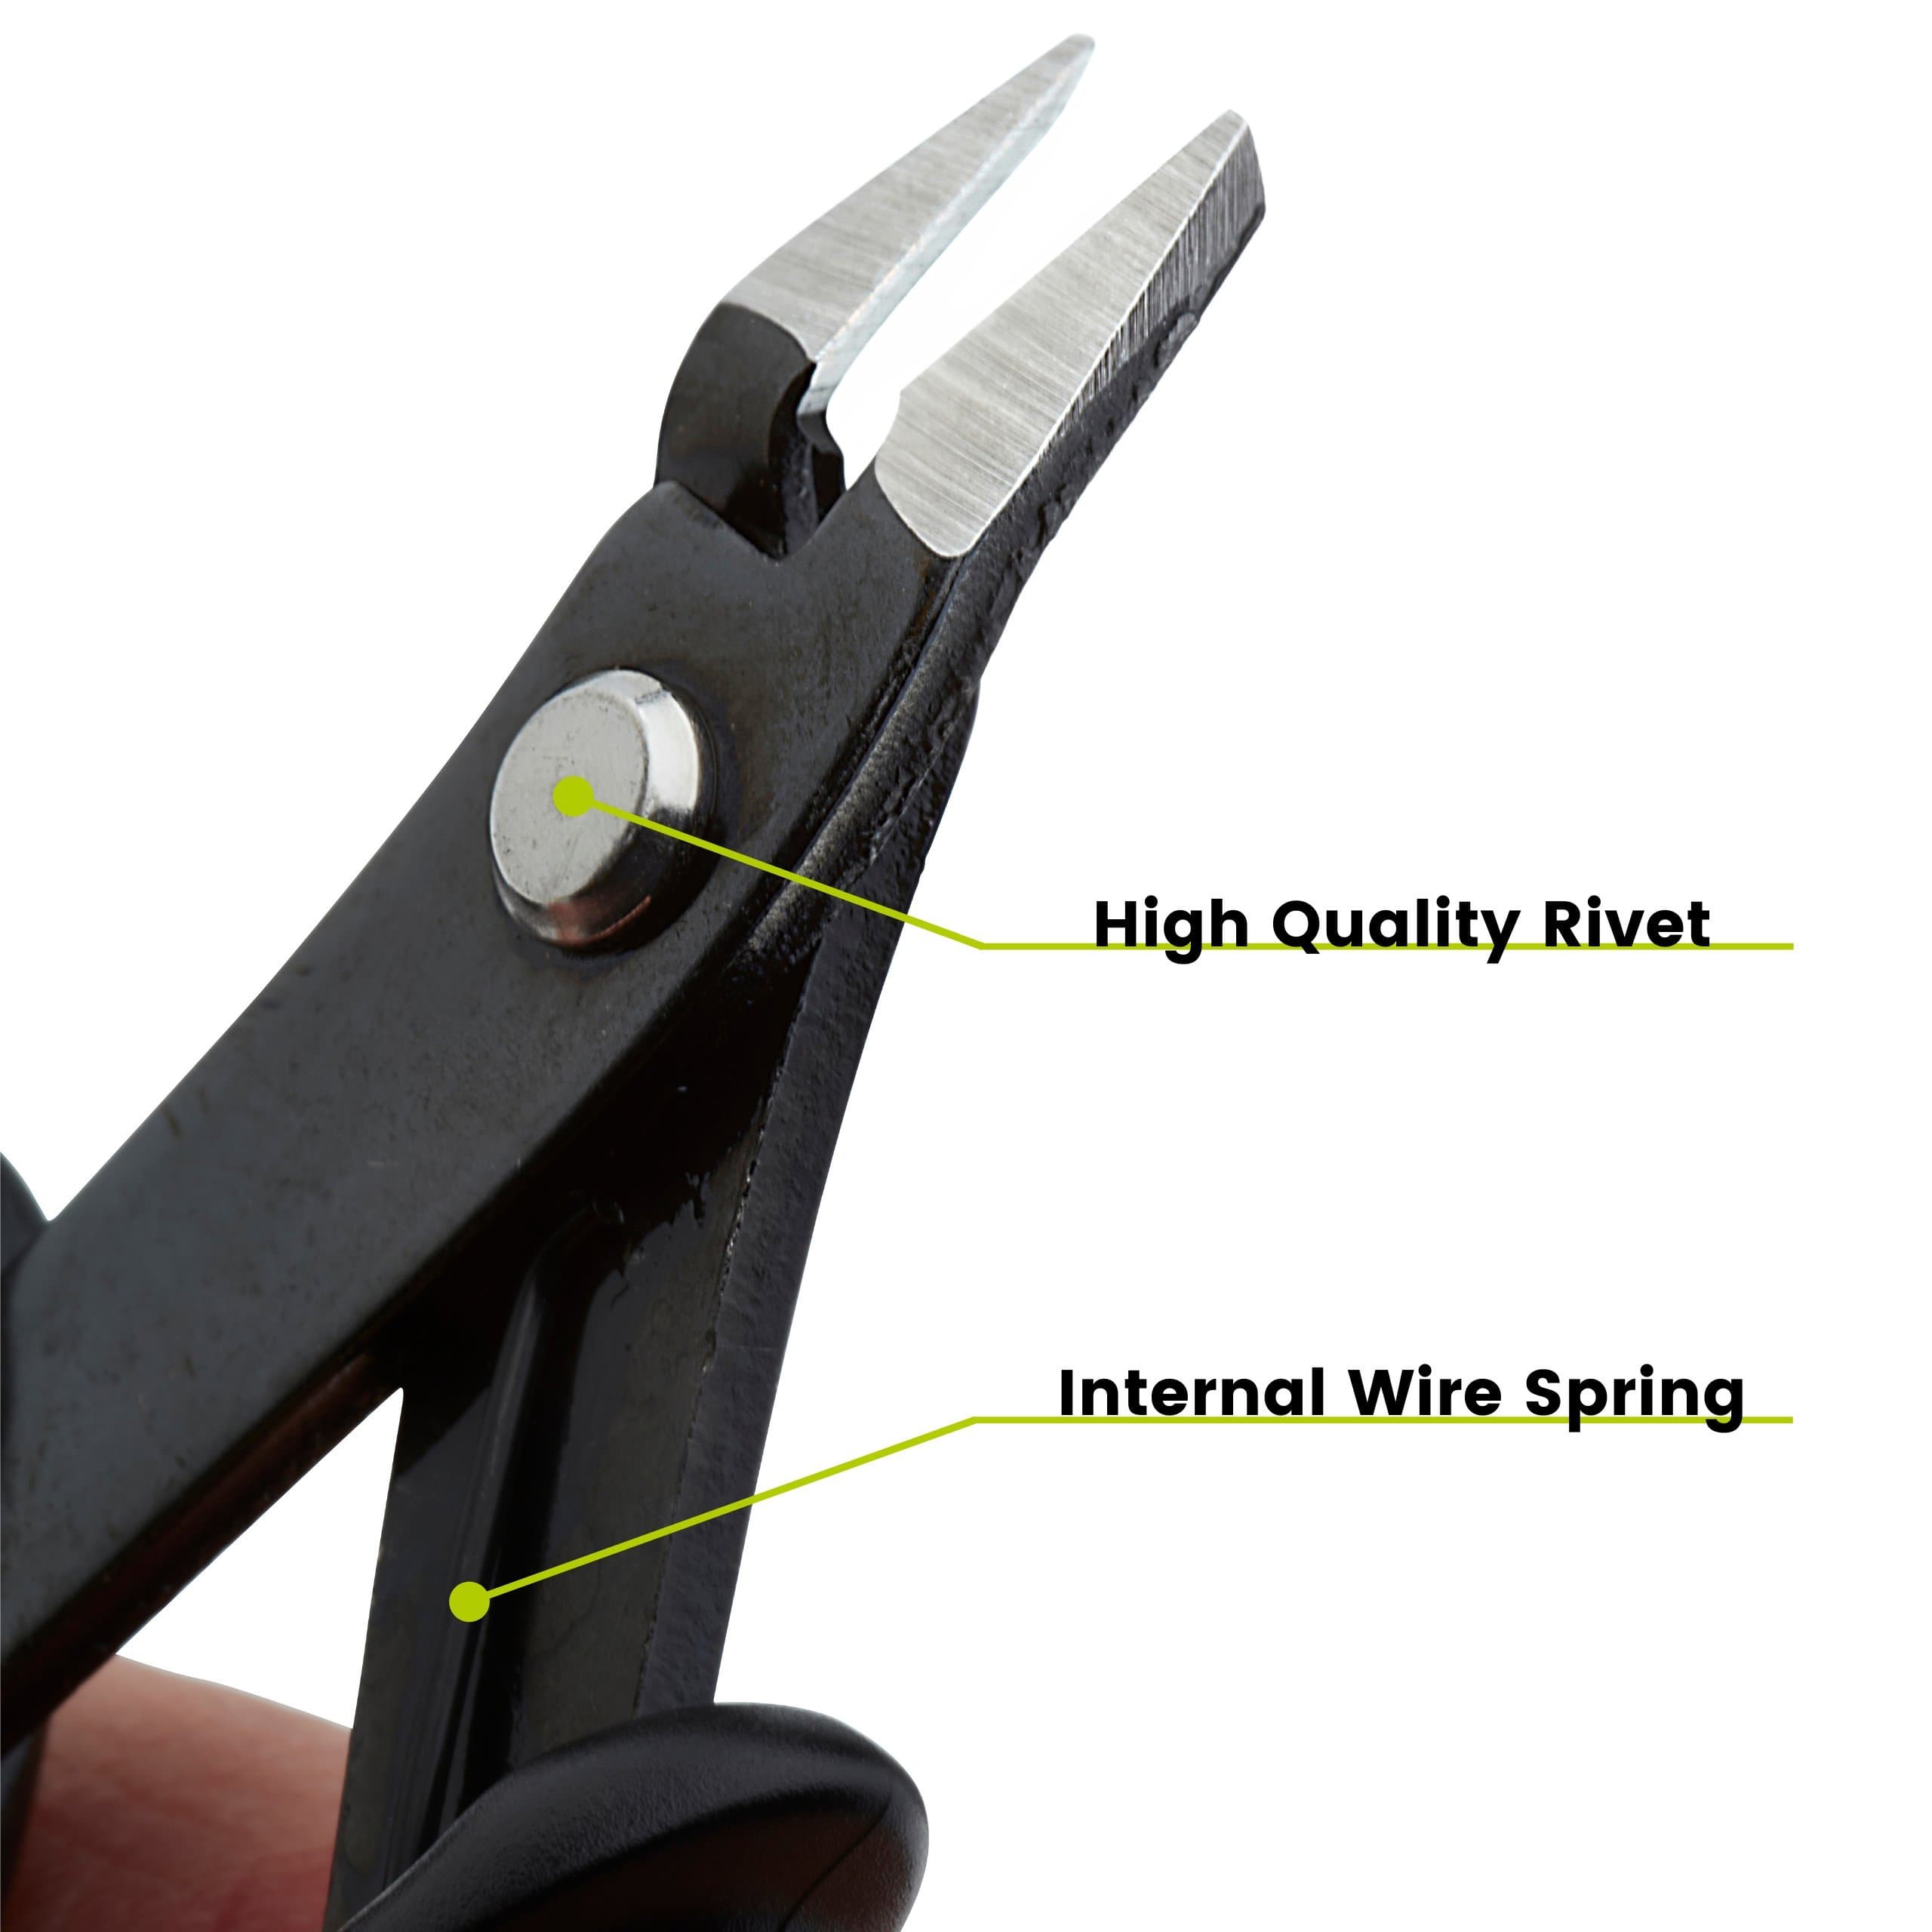 Hareline Super Flush Cutter Pliers with Wire Catcher